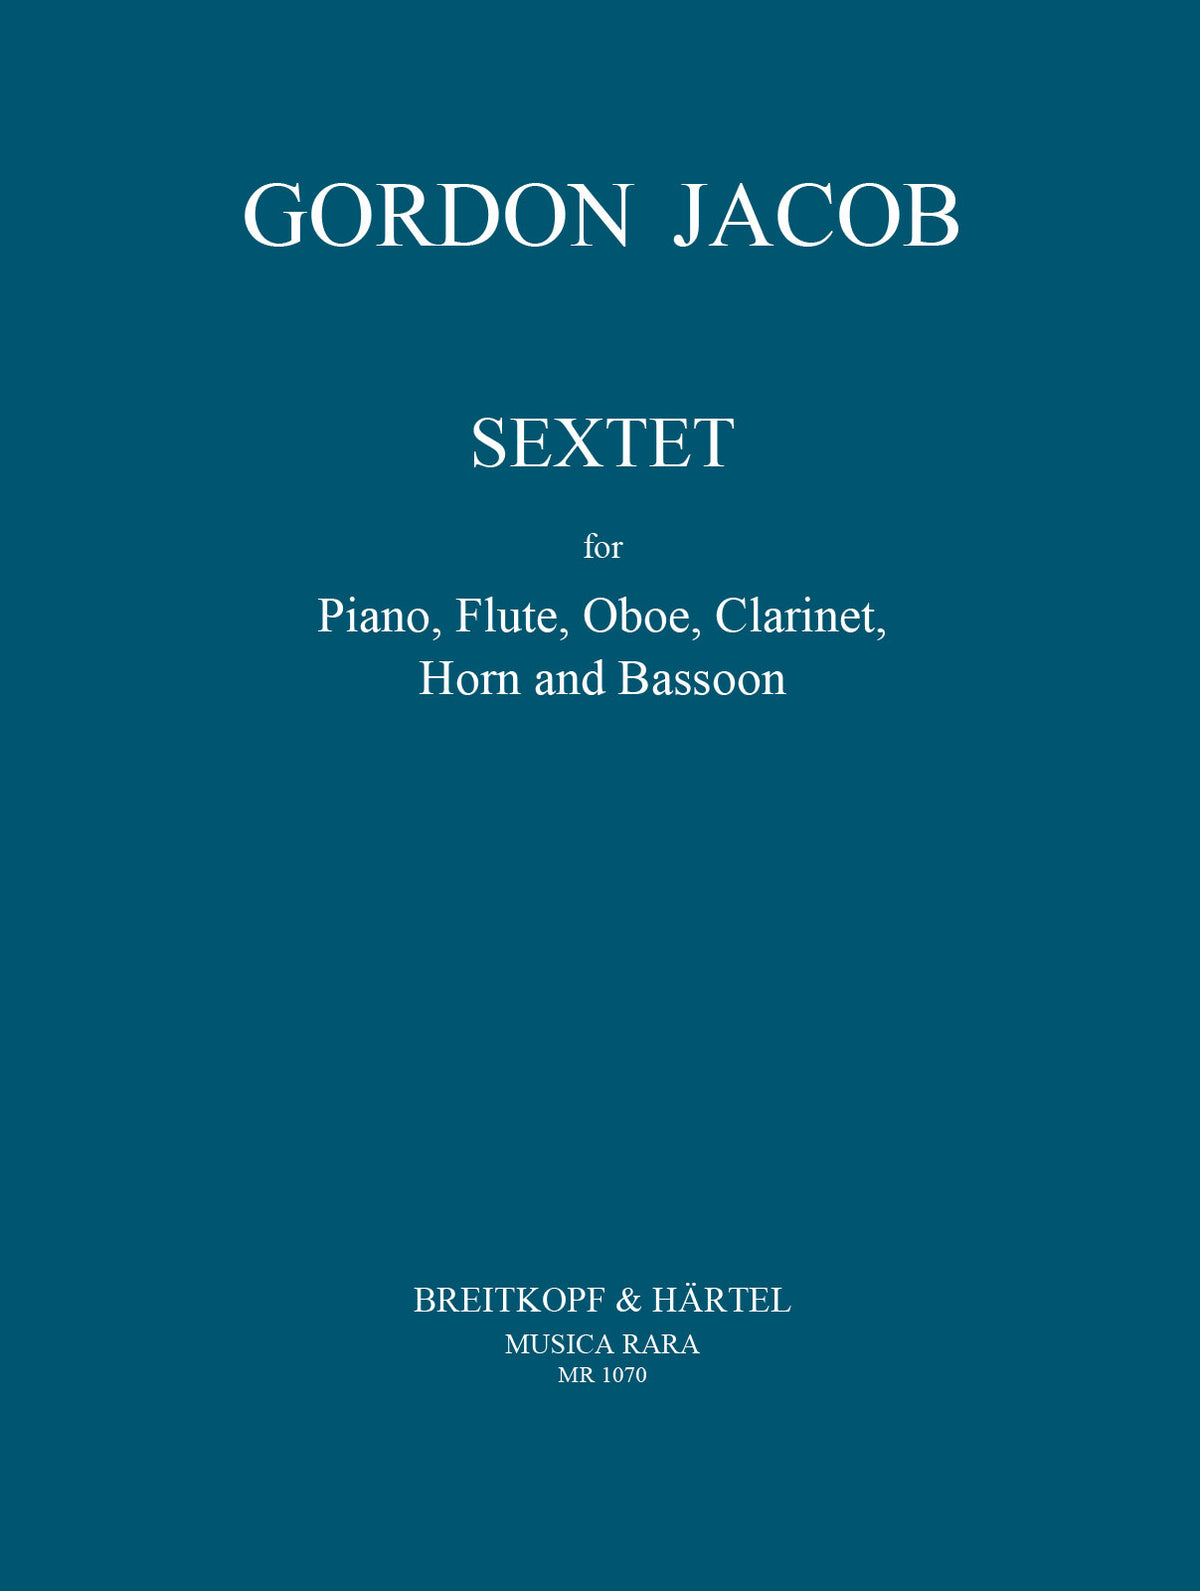 Jacob Sextet for Piano, Flute, Oboe, Clarinet, Horn & Bassoon